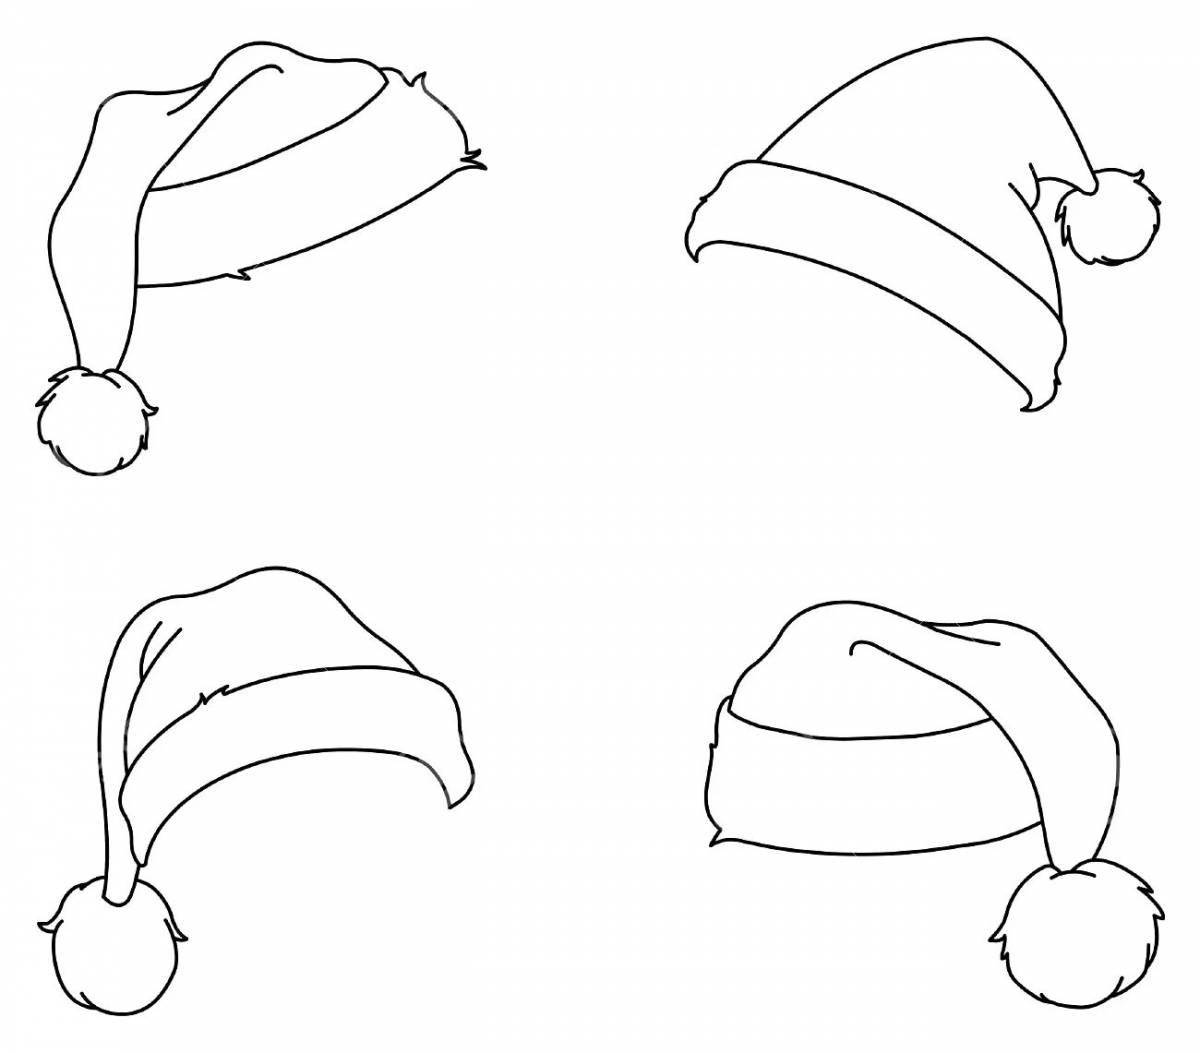 Shiny Christmas hat coloring book